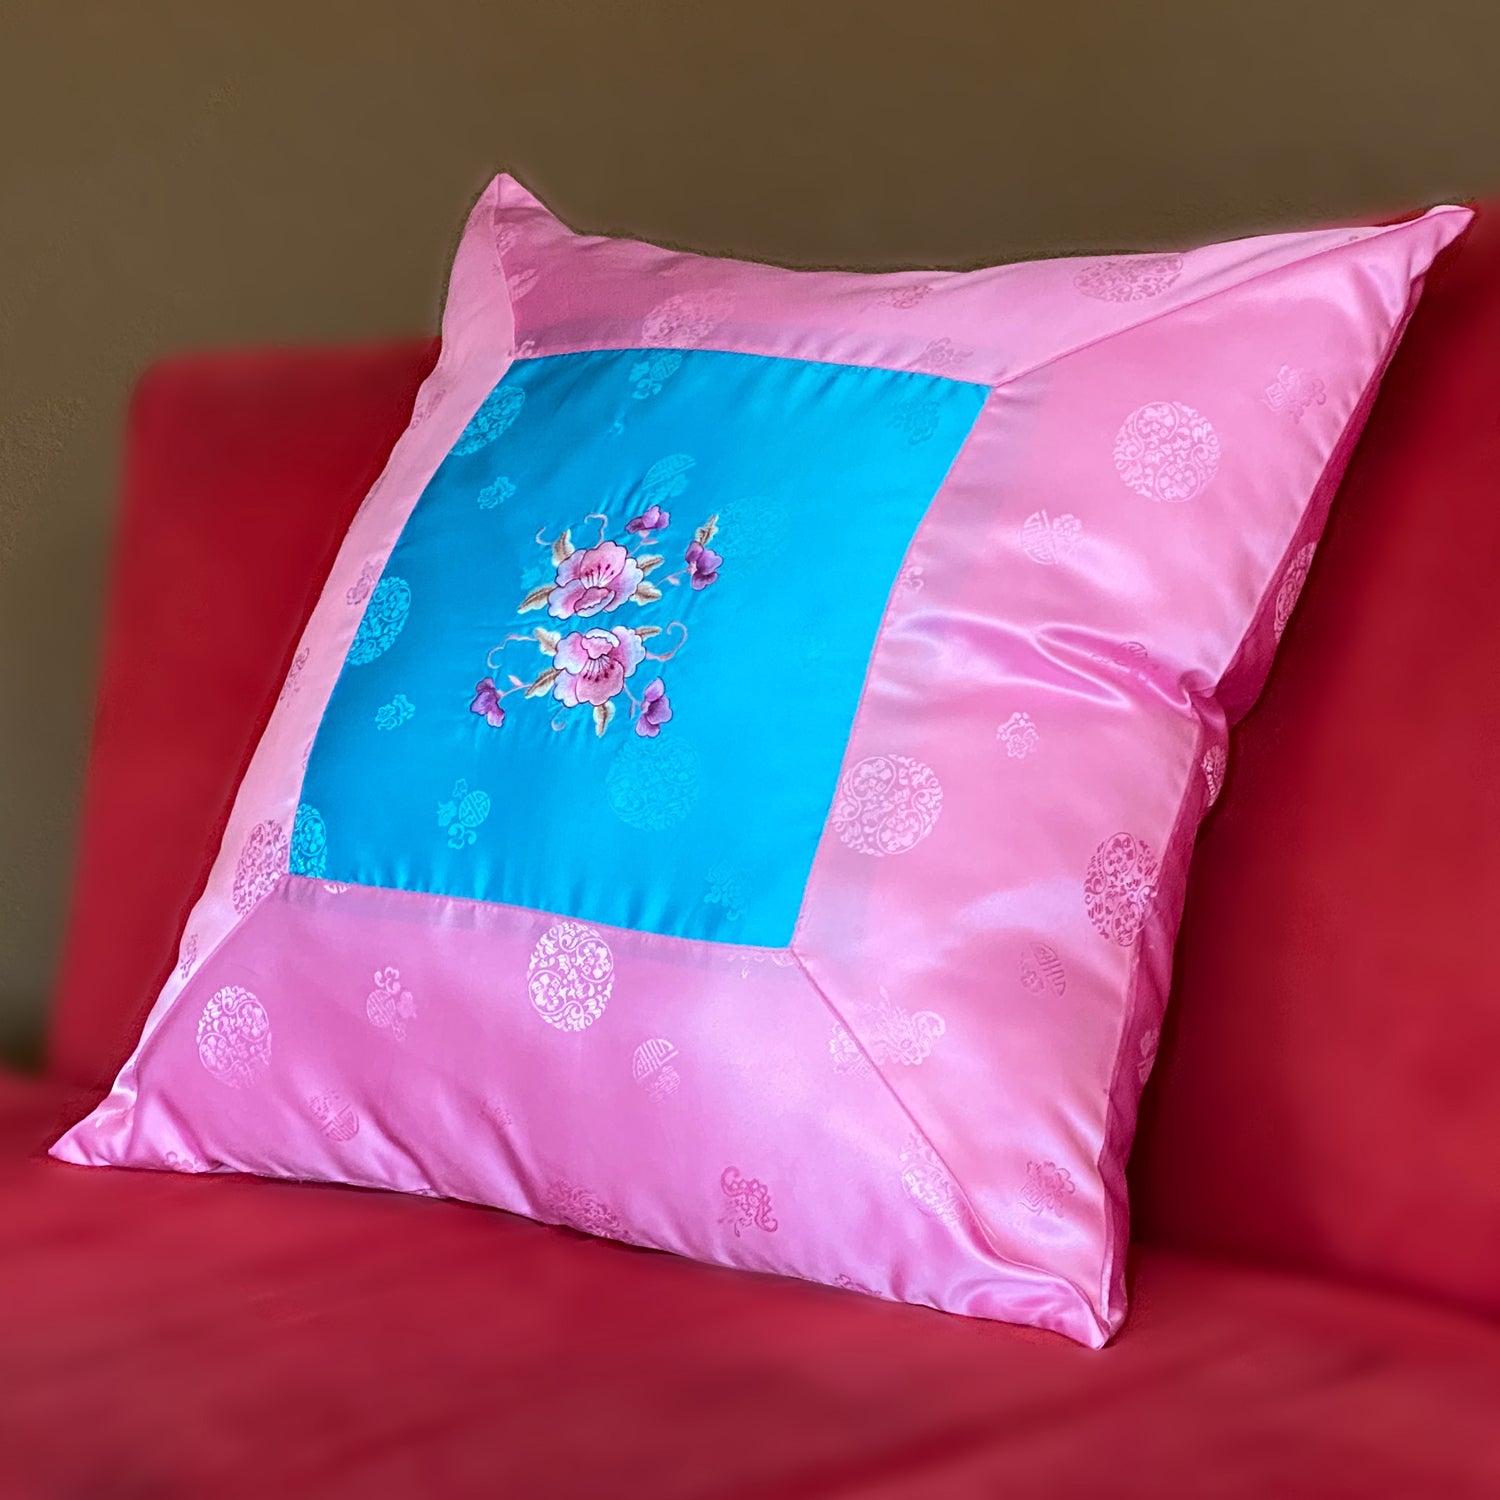 Korean Queen Meditation Floor Cushion, Throw Pillow, Zafu With Embroidery  Design for Women and Men, Yoga, Sitting on Floor: 24 